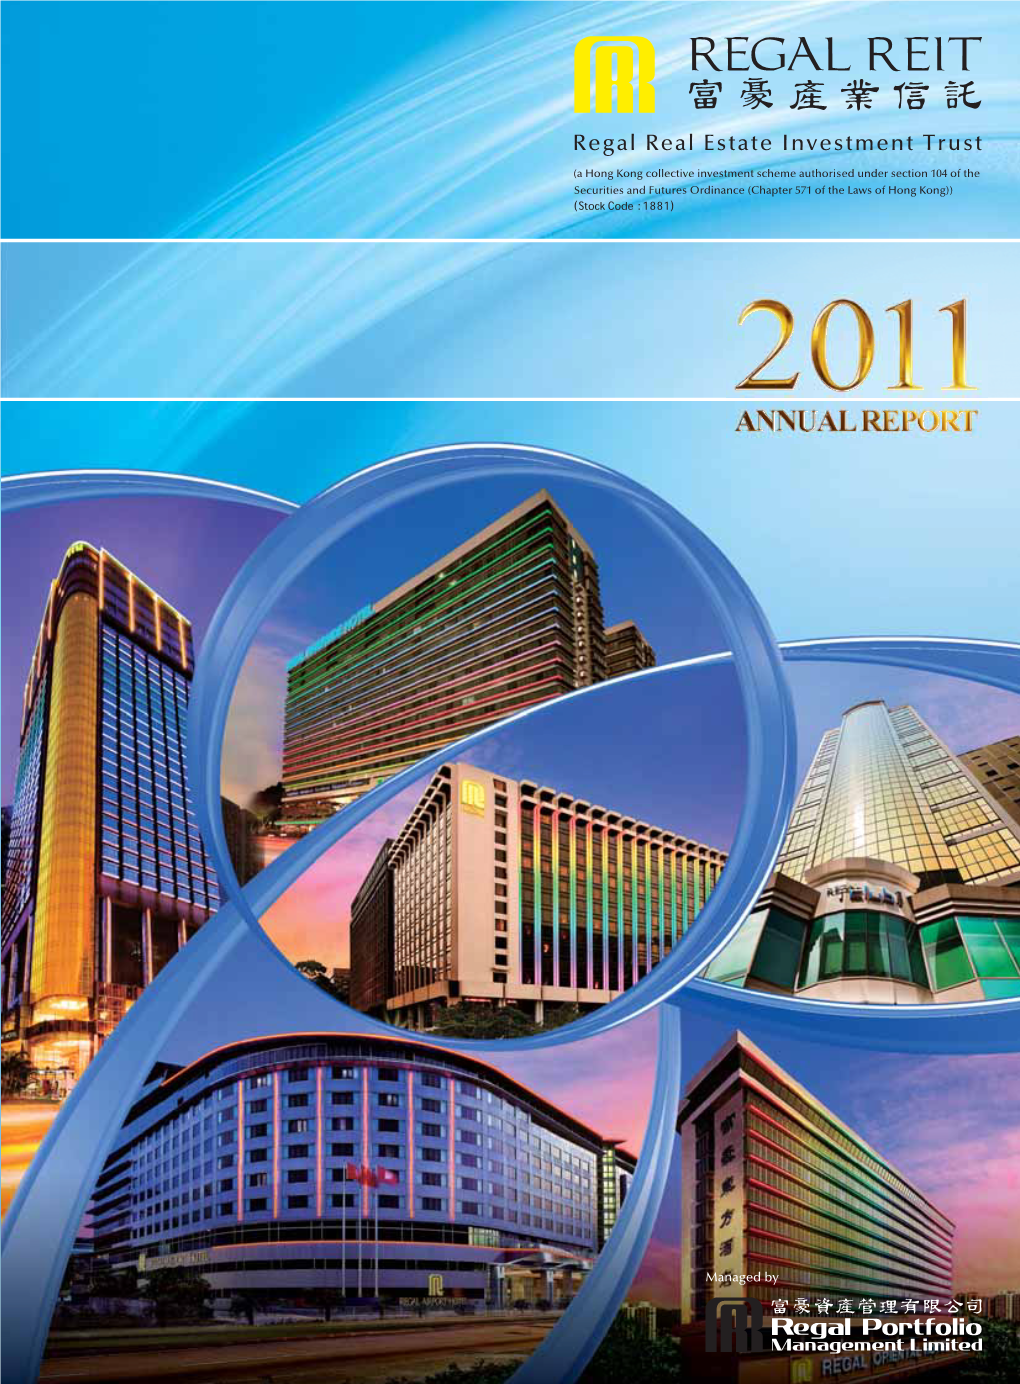 Annual Report 2011 CORPORATE INFORMATION